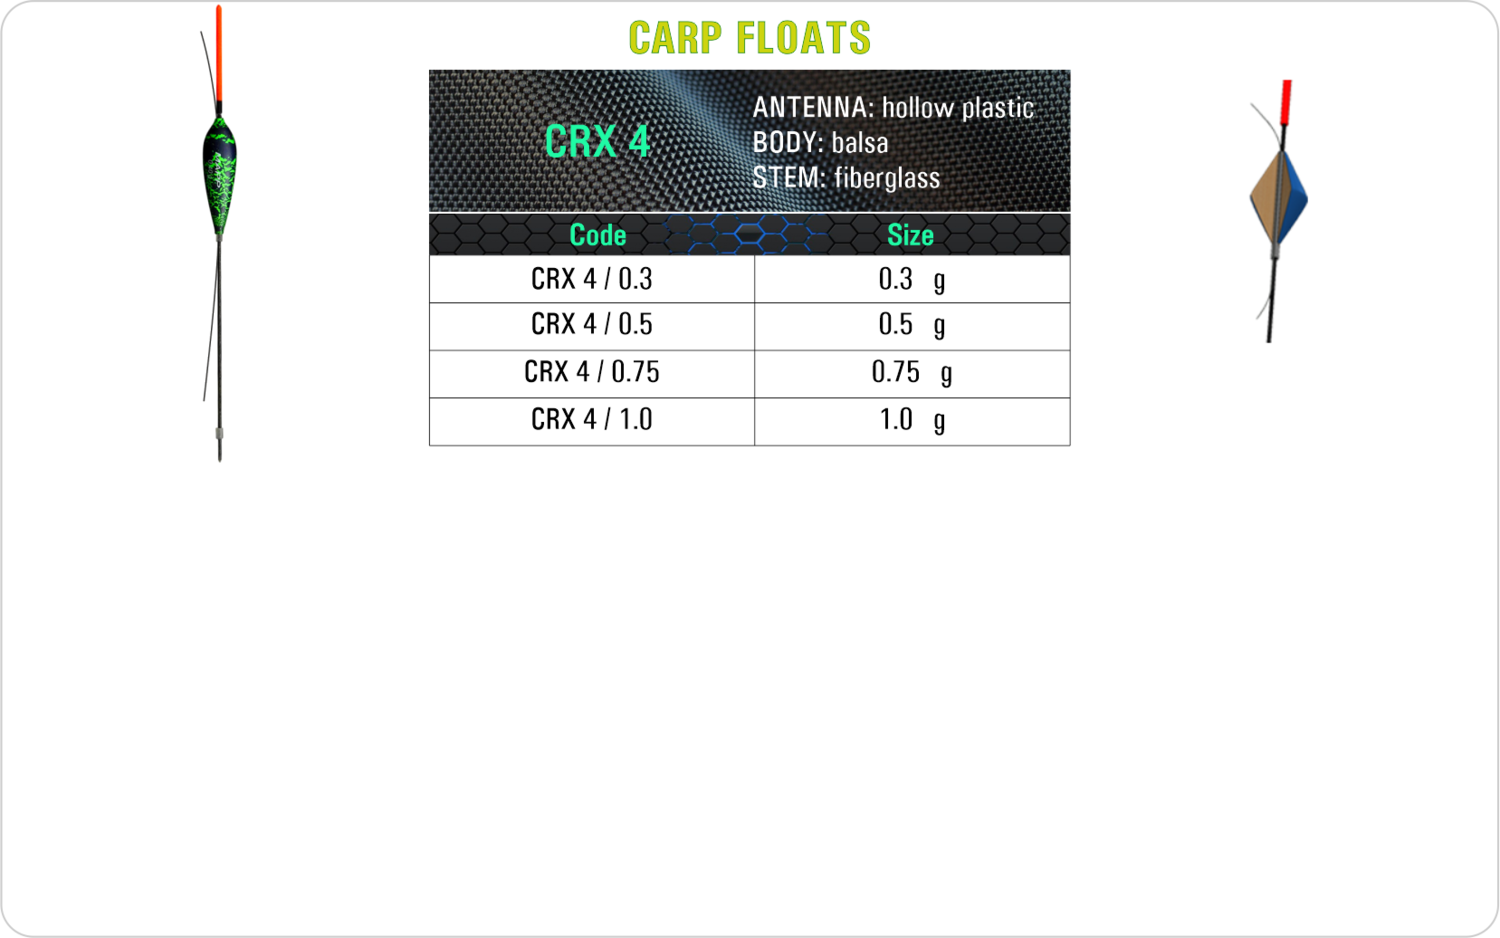 SF CRX 4 Carp float model and table containing an additional information about this float with different codes, sizes, types of the body, the stem and the antenna of the float.